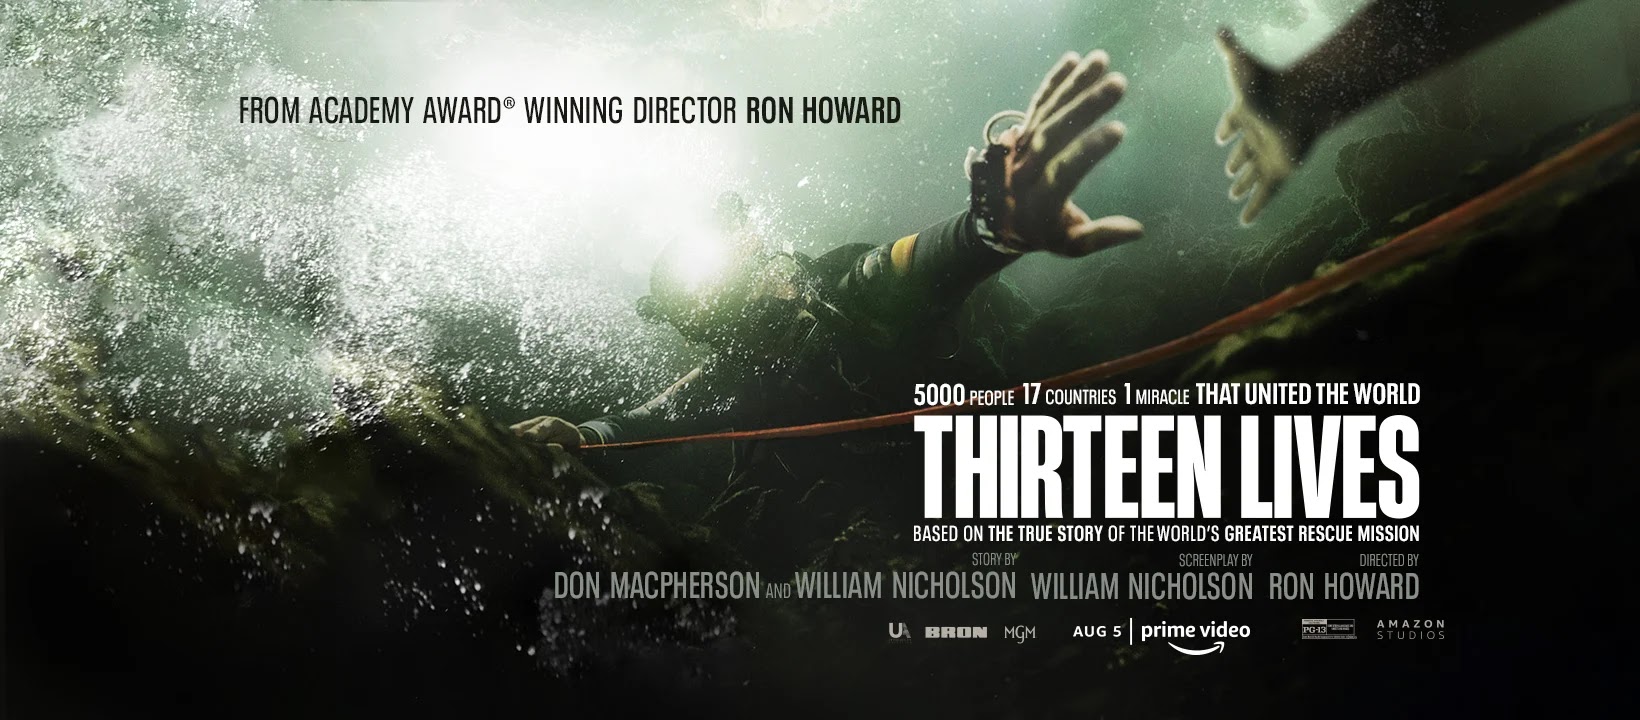 Thirteen Lives Movie Release date, Cast, Trailer and Ott Platform. All You Need to Know